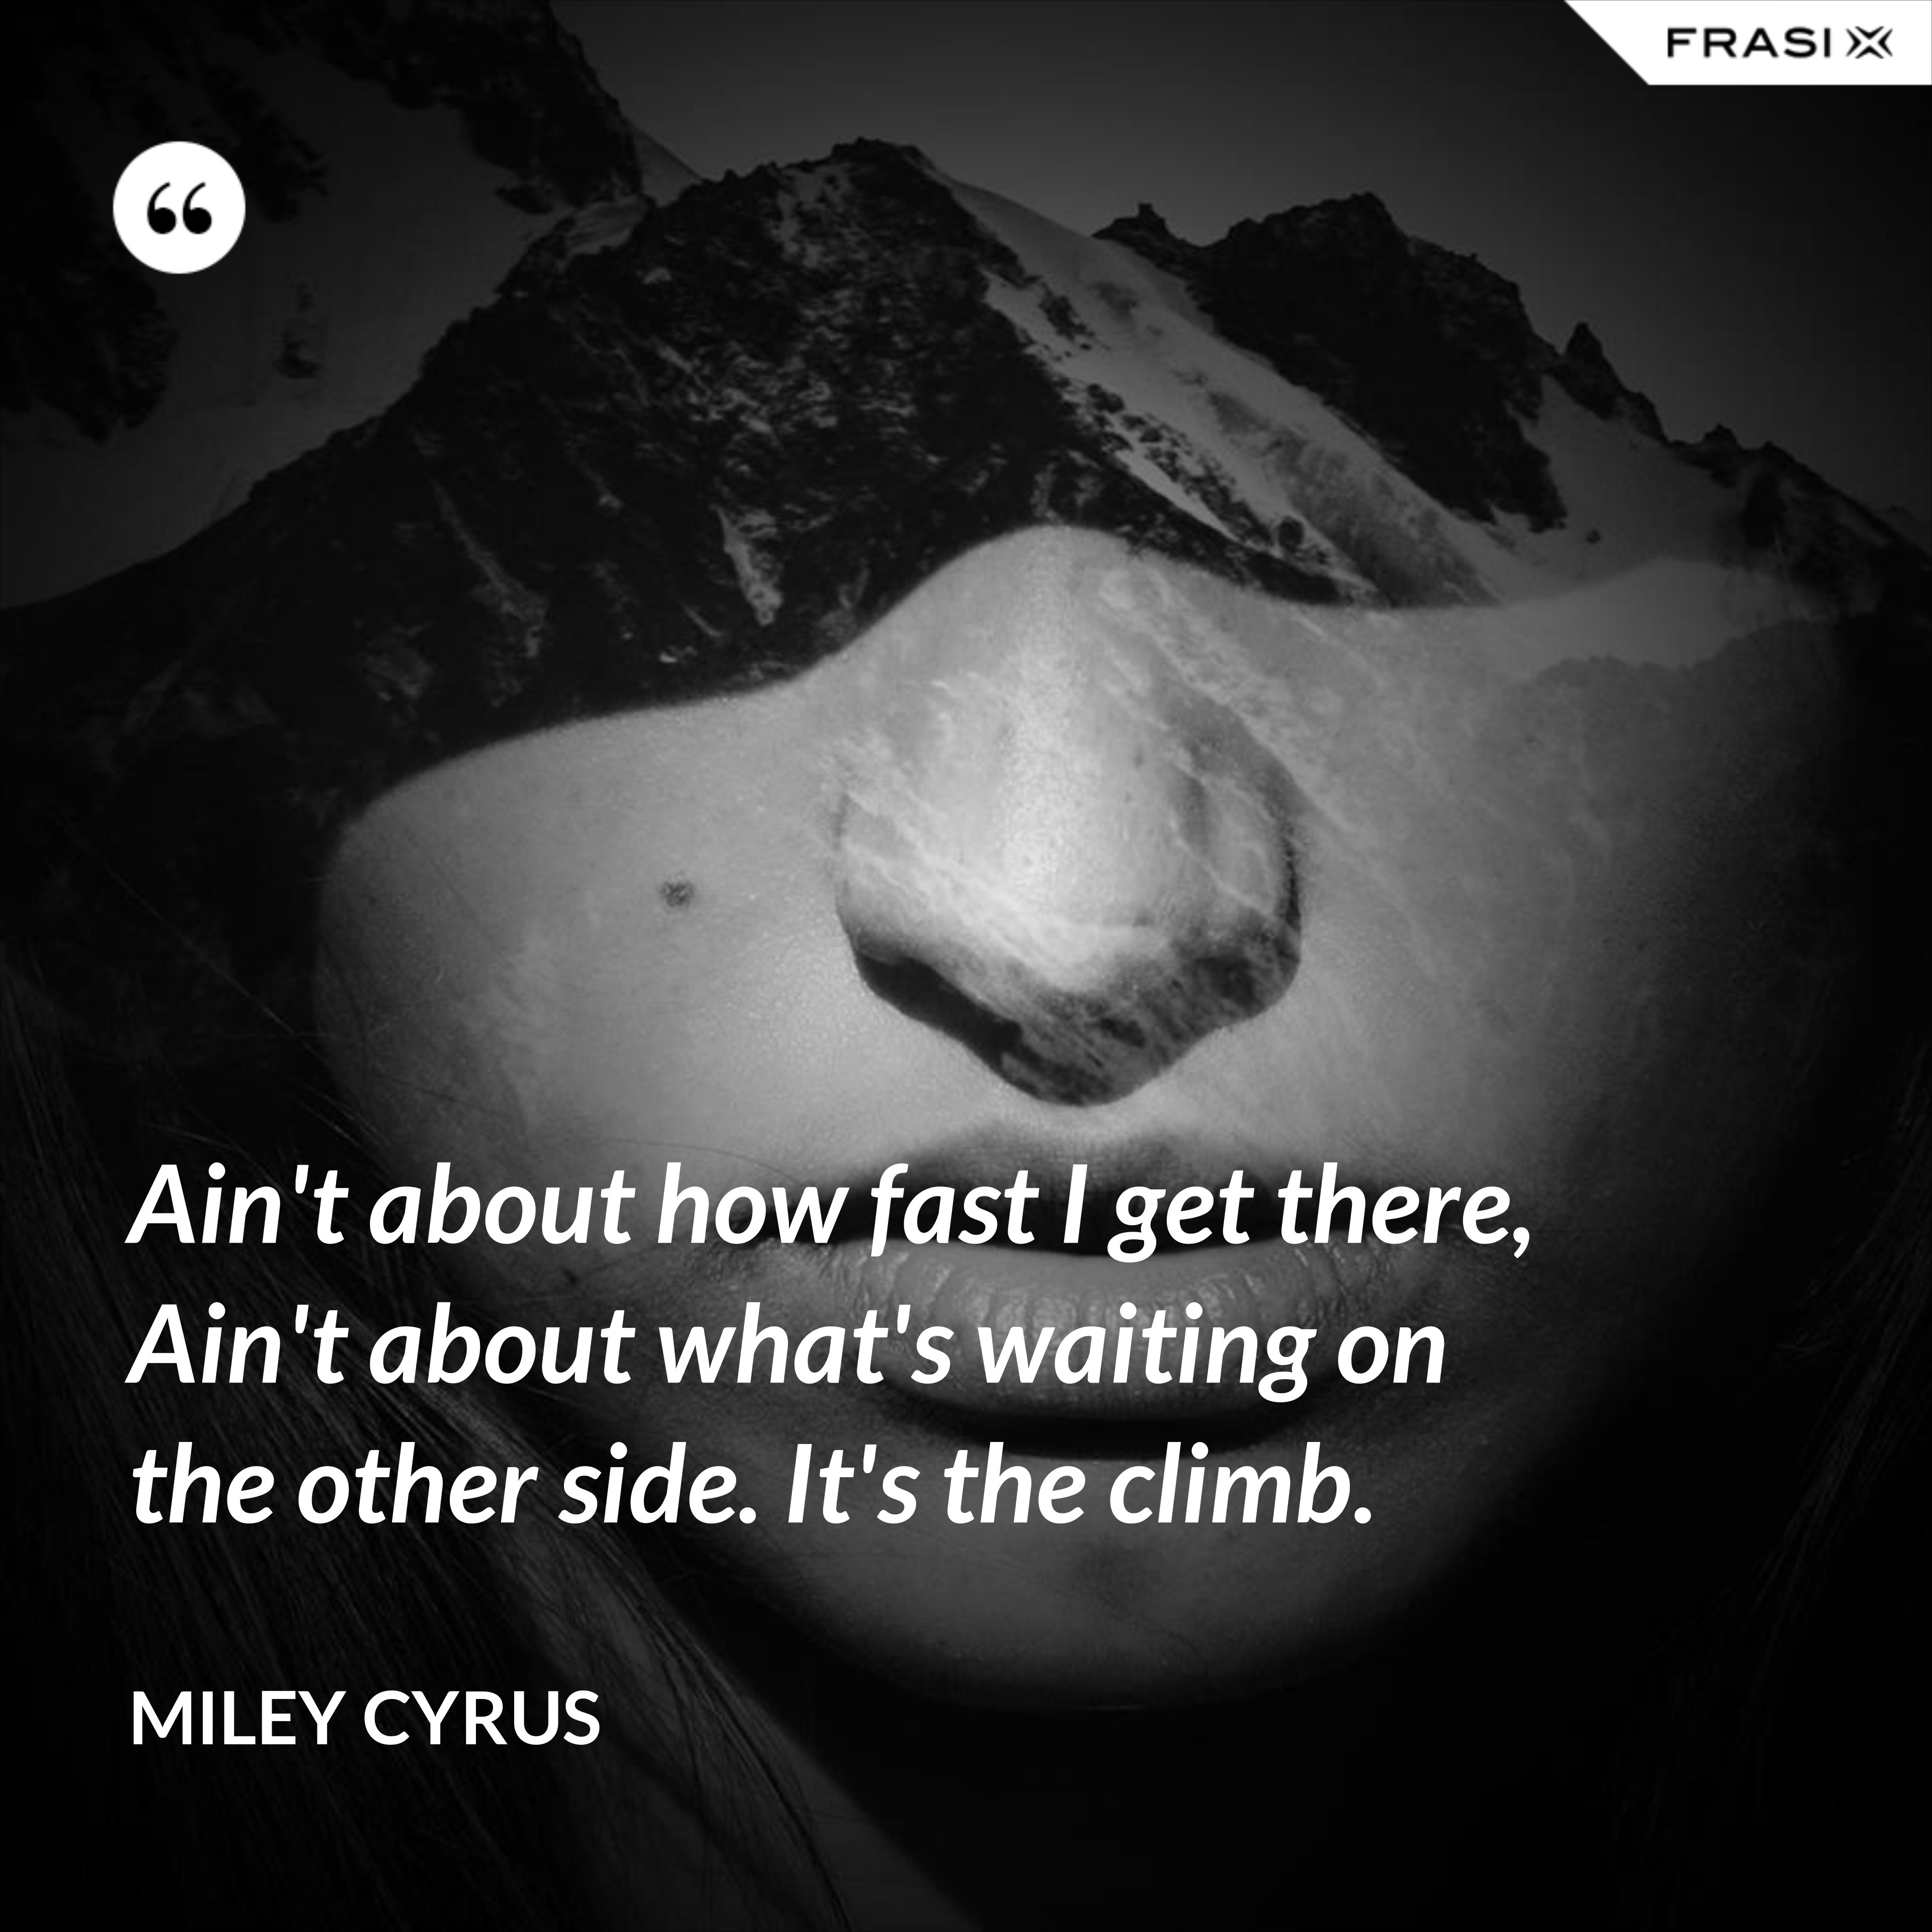 Ain't about how fast I get there, Ain't about what's waiting on the other side. It's the climb. - Miley Cyrus